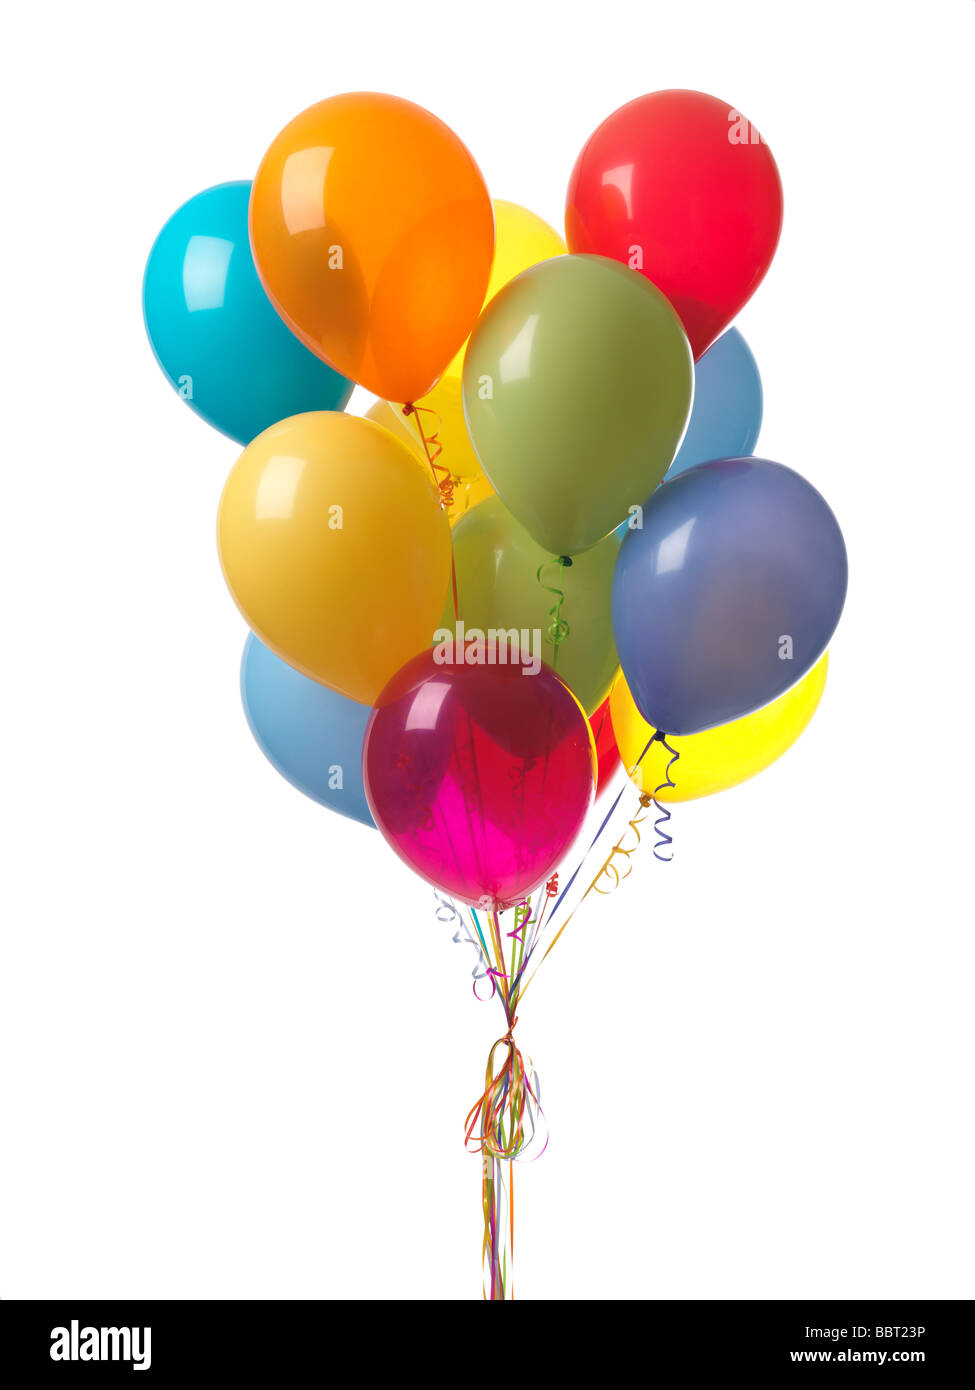 Colorful air balloons Stock Photo